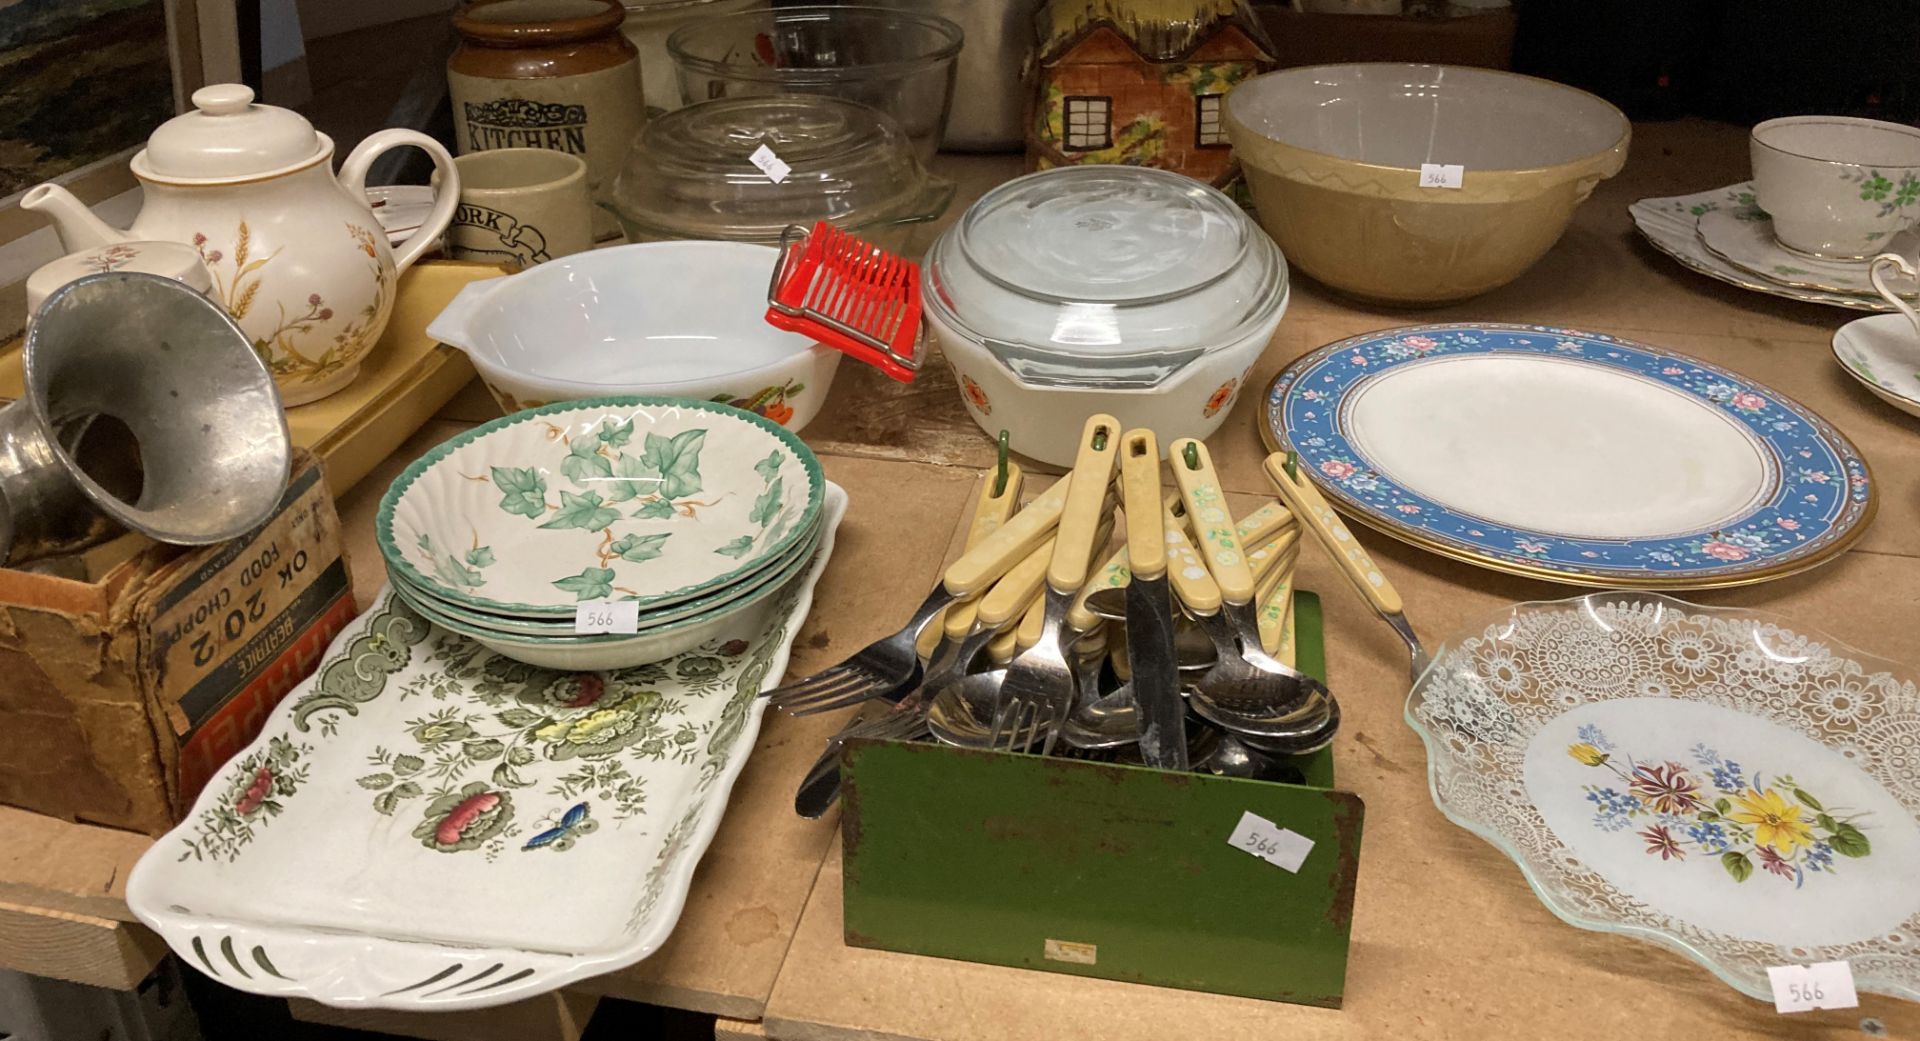 Assorted kitchen ceramics, Pyrex dishes, mixing bowl, table mounted hand mincer, etc.